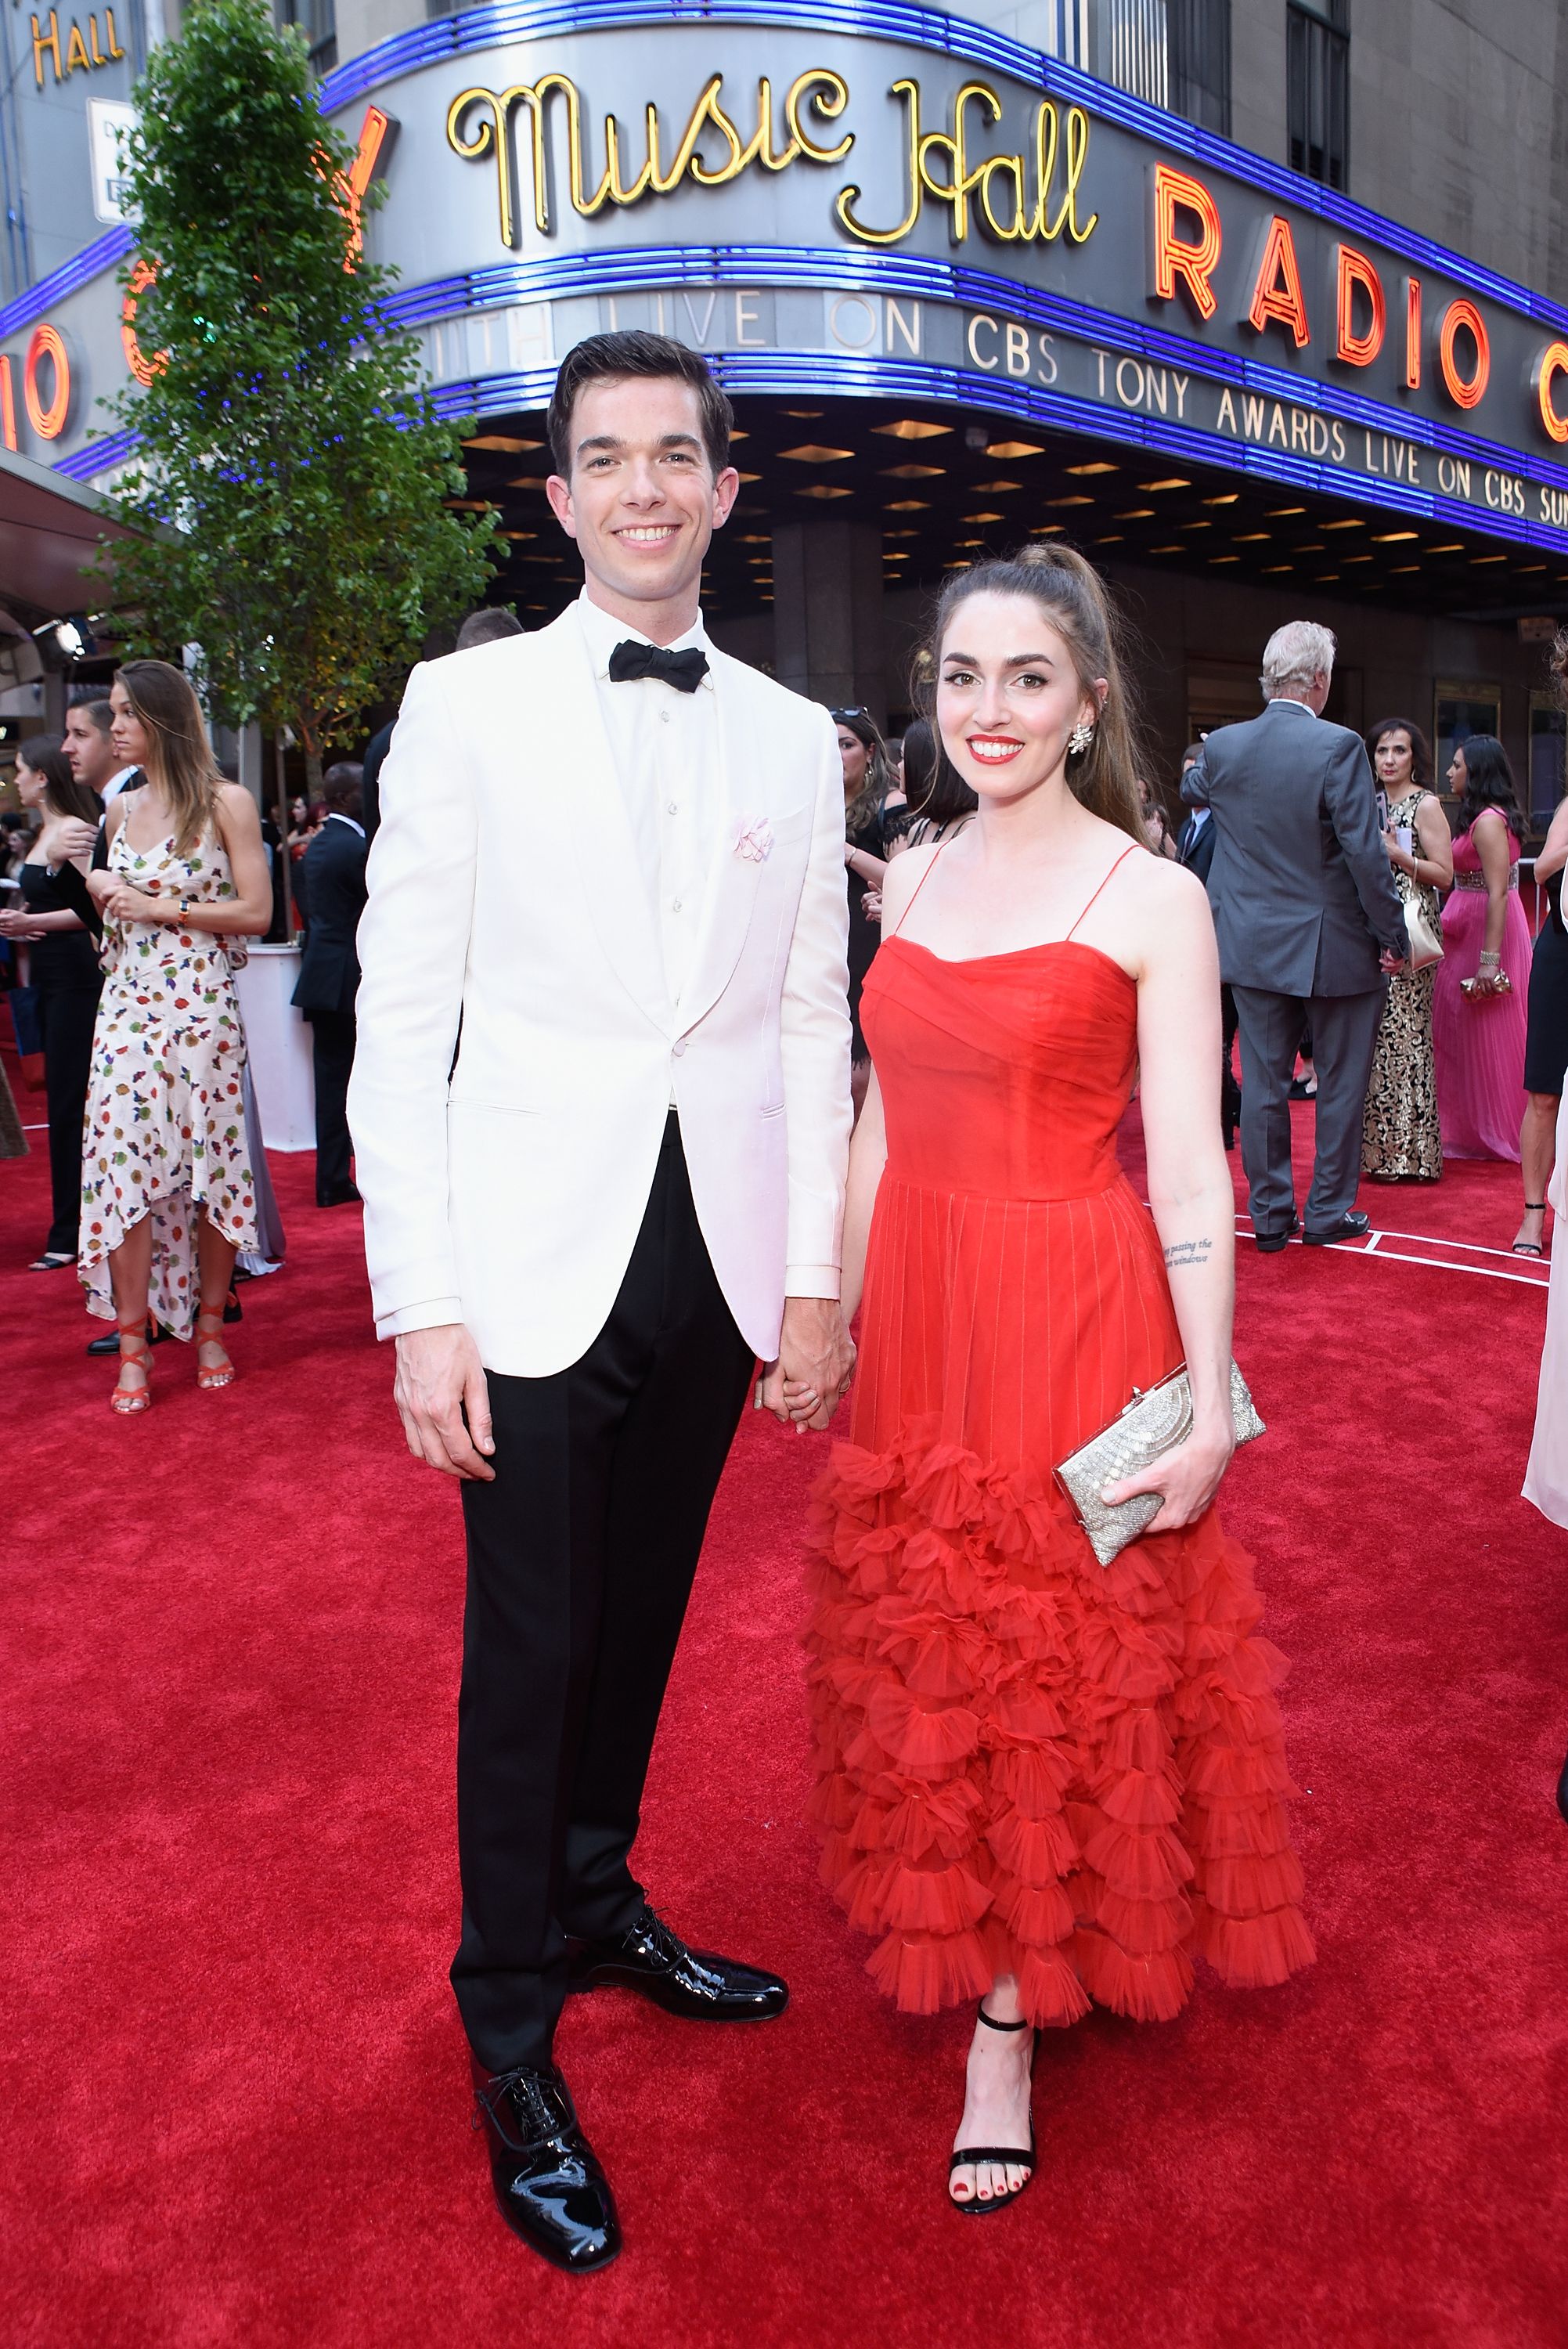 John Mulaney and Anna Marie Tendler pose on red carpet outside Radio City Music Hall